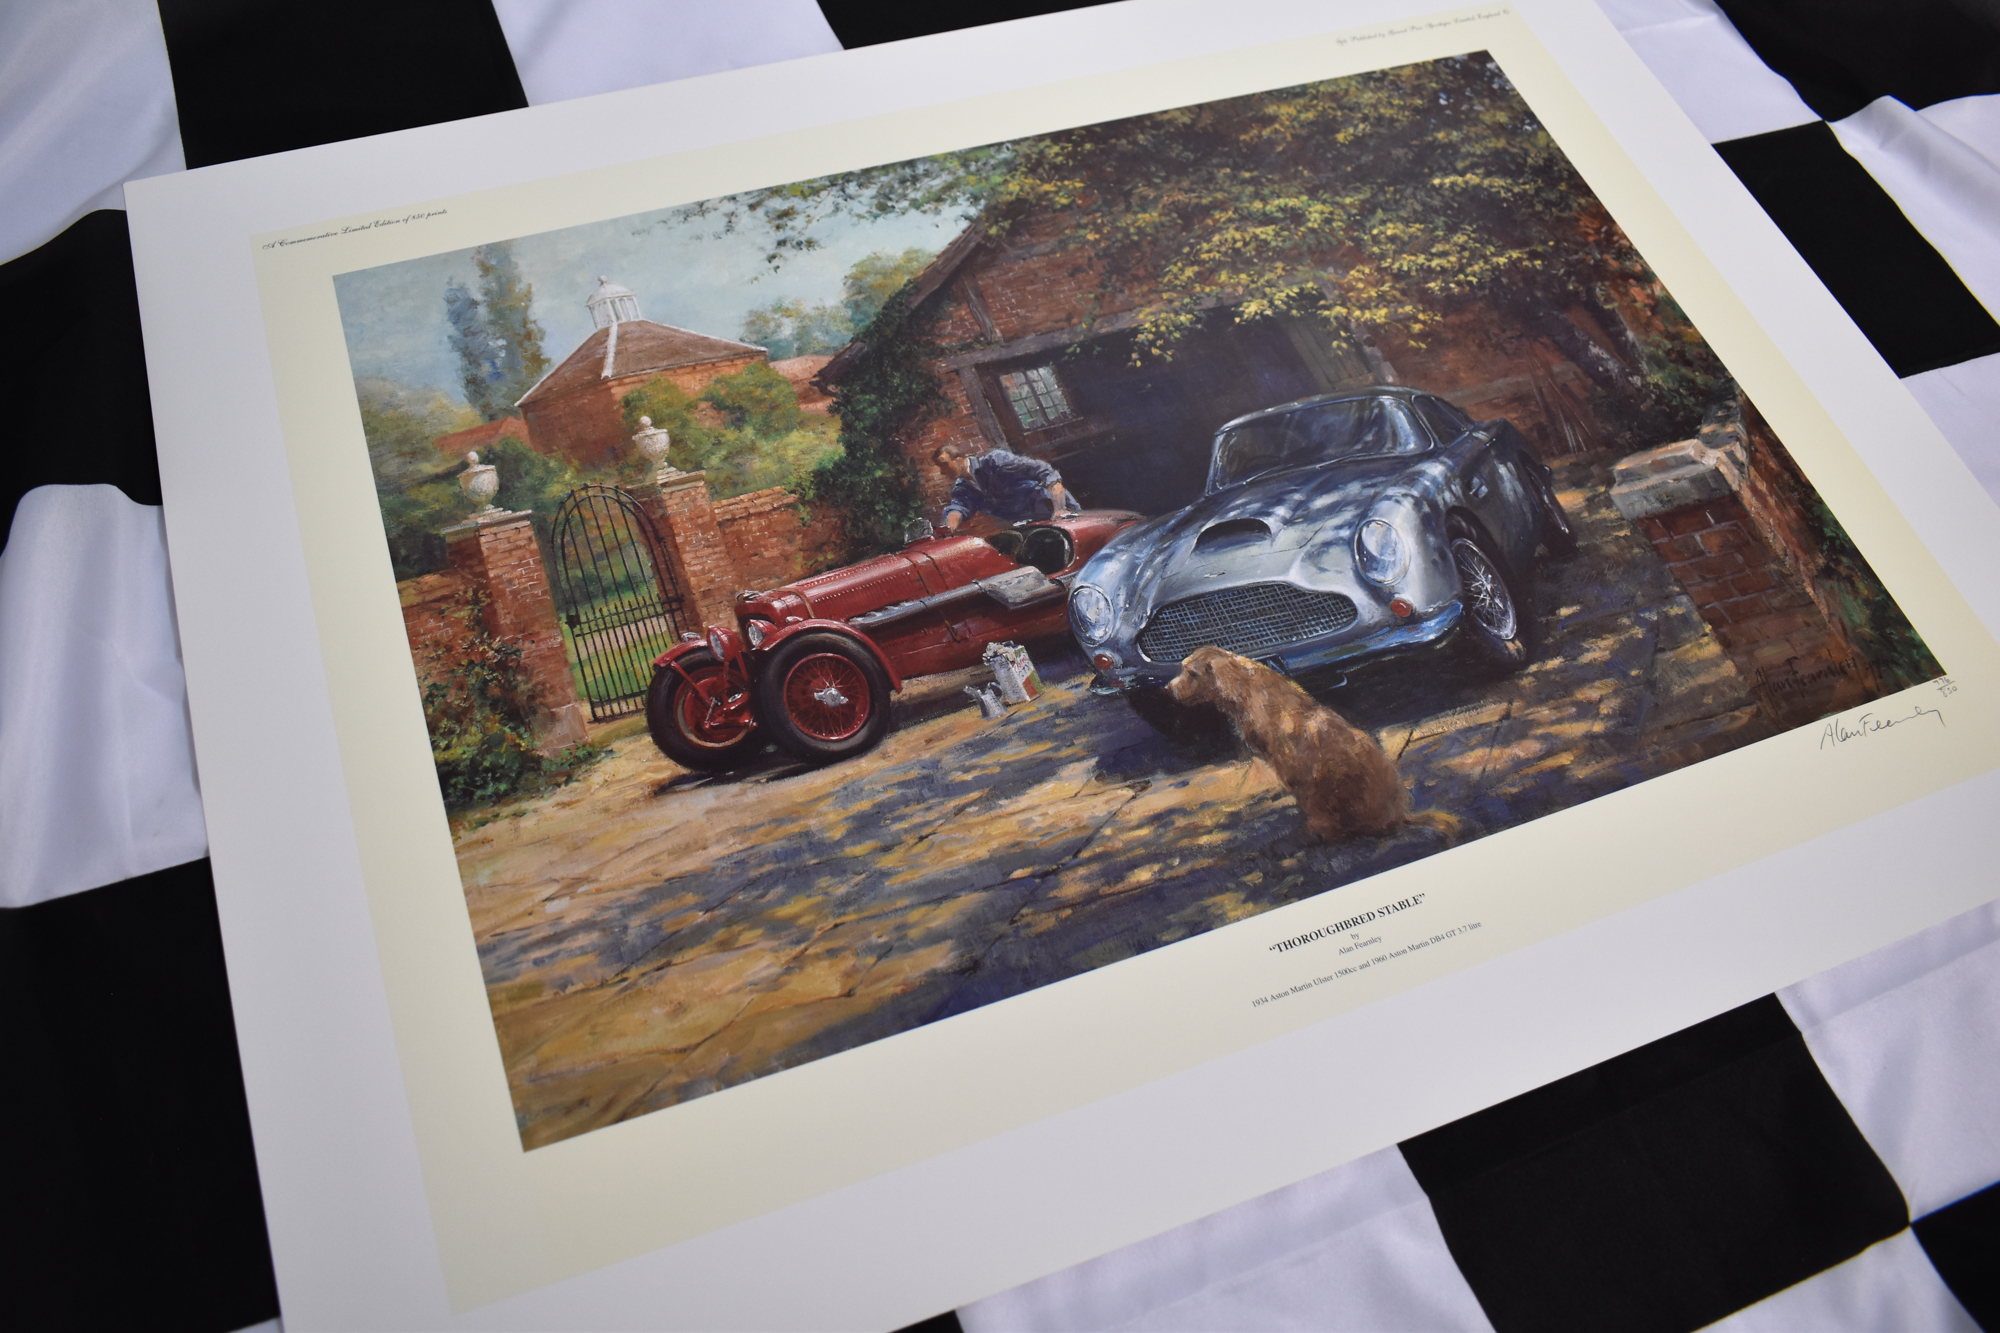 limited edition print of a 1934 Aston Martin Ulster 1500cc and a 1960 Aston Martin DB4 GT 3.7Ltr portrayed in an idyllic country house scene by leading automotive artist Alan Fearnley.